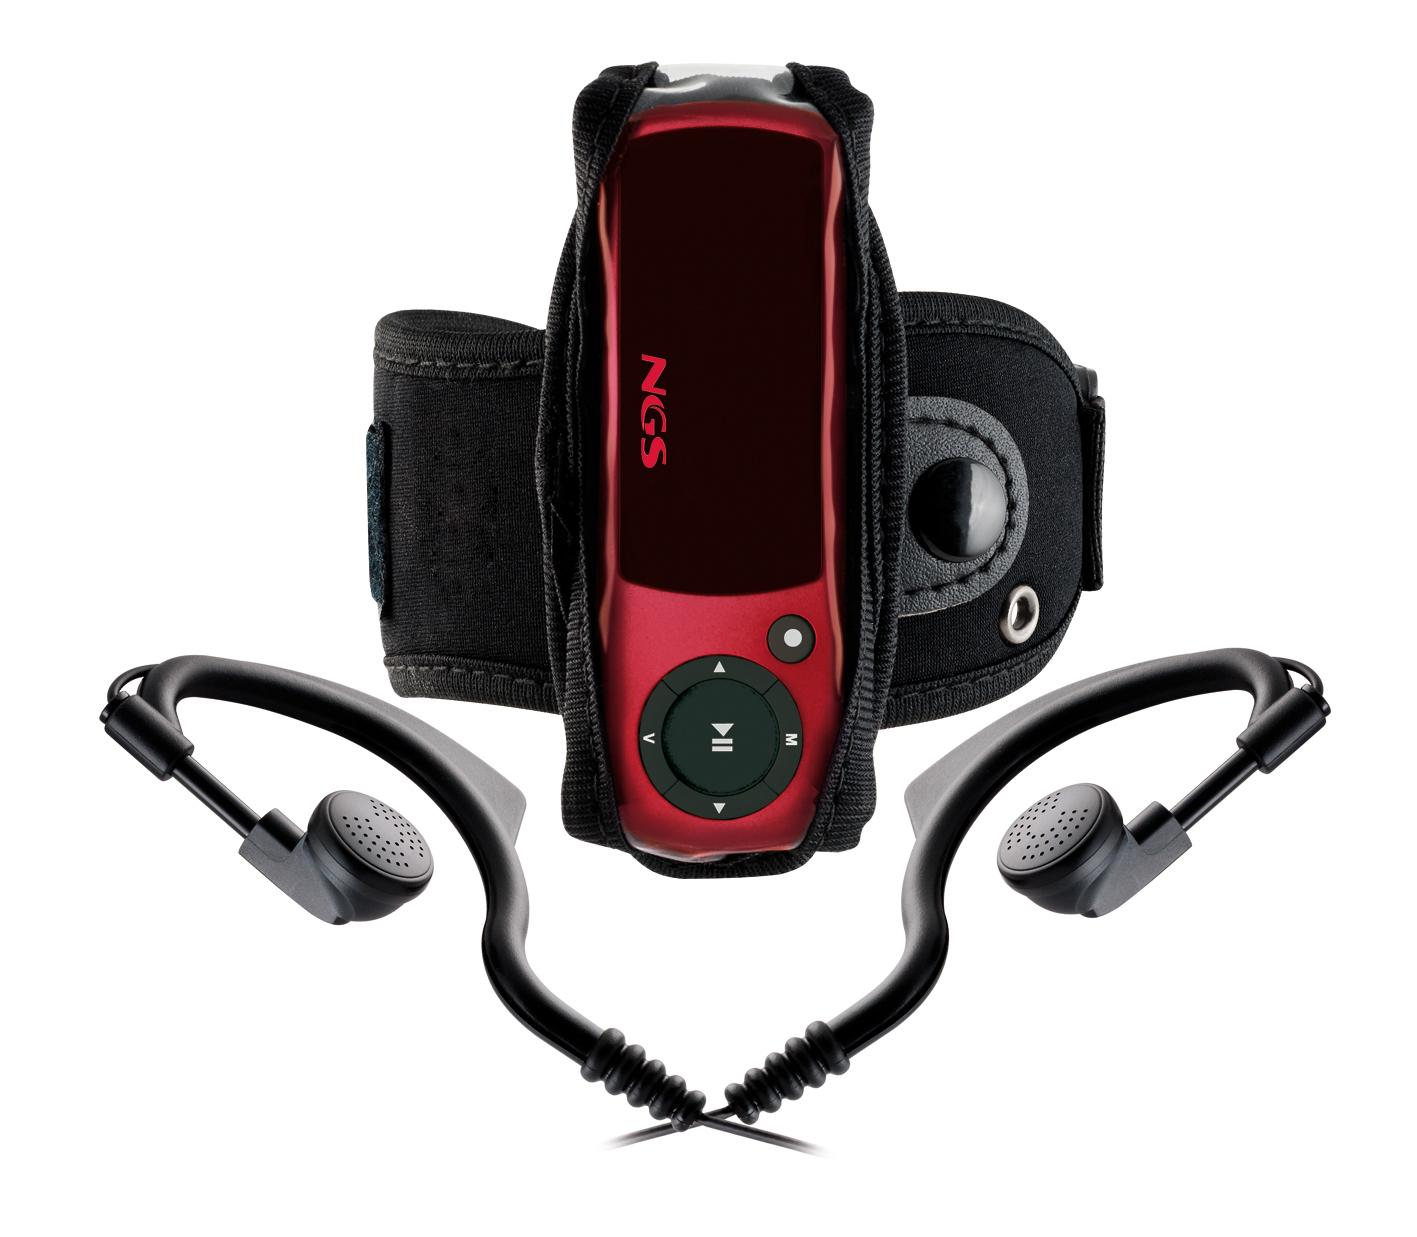 Foto Mp3/Mp4 Ngs ngs red popping mp3 4gb fm rojo [RED POPPING 4GB] [843600